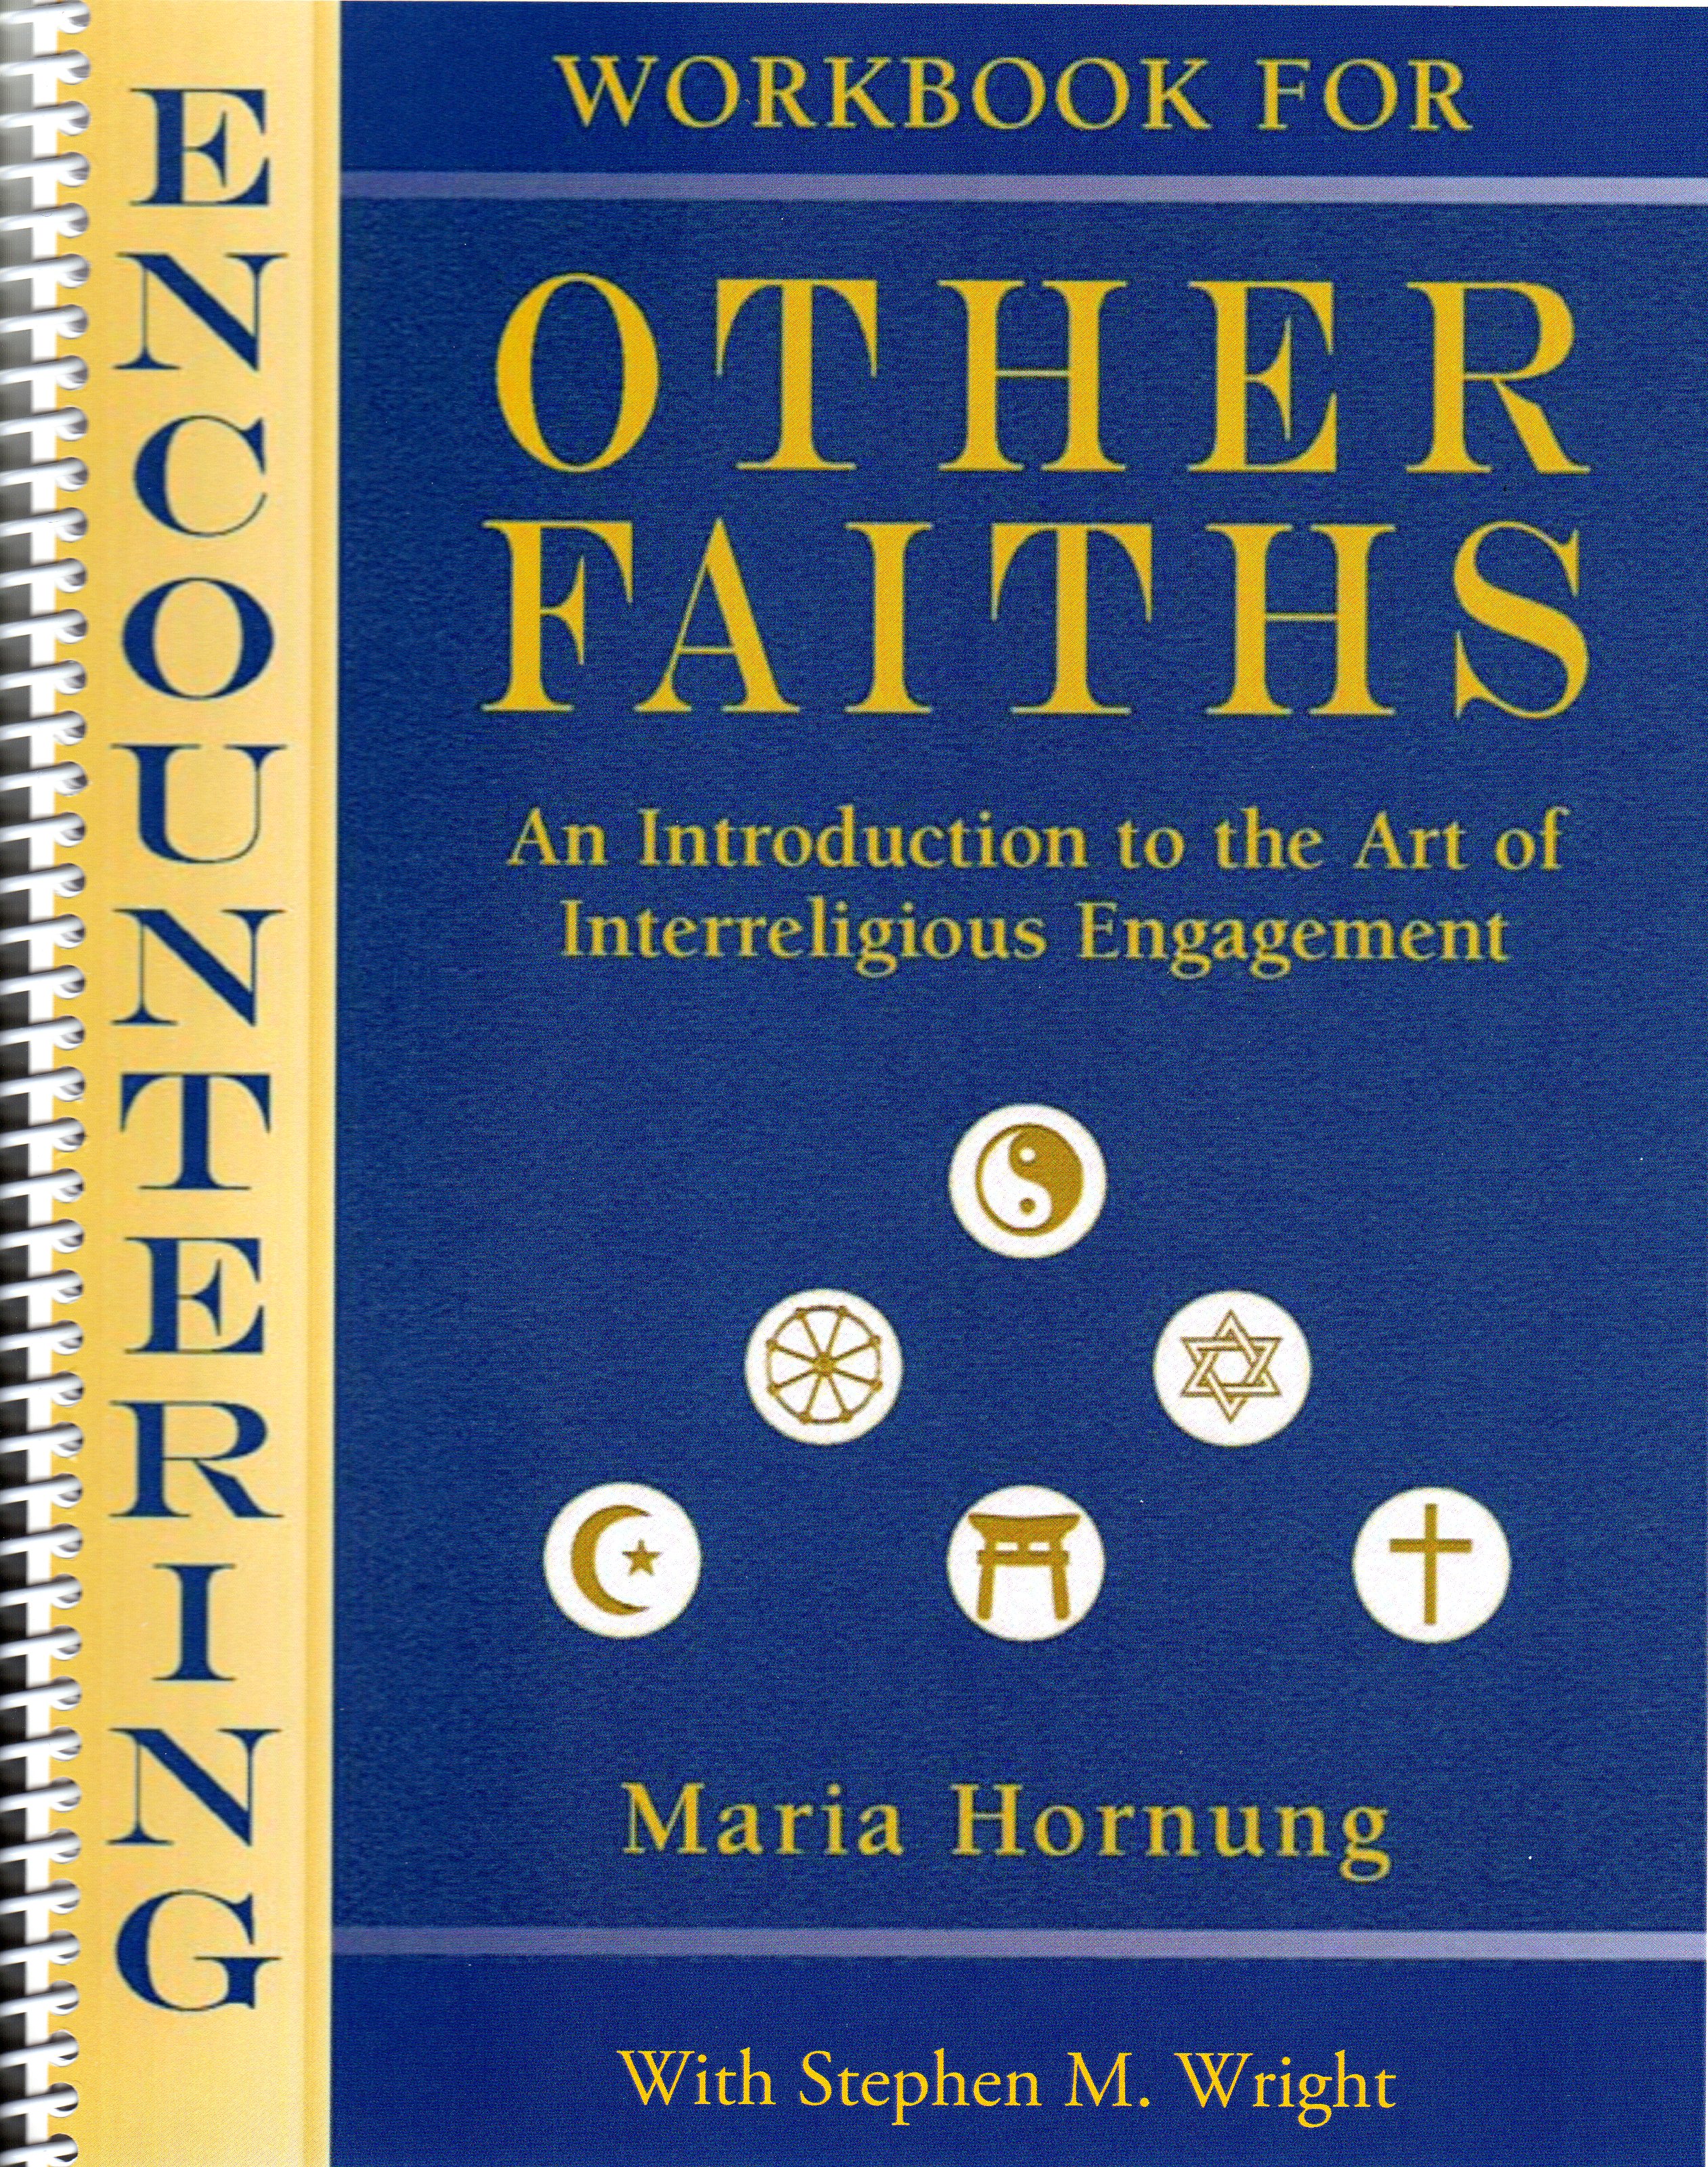 Encountering Other Faiths Workbook by Sister Maria Hornung